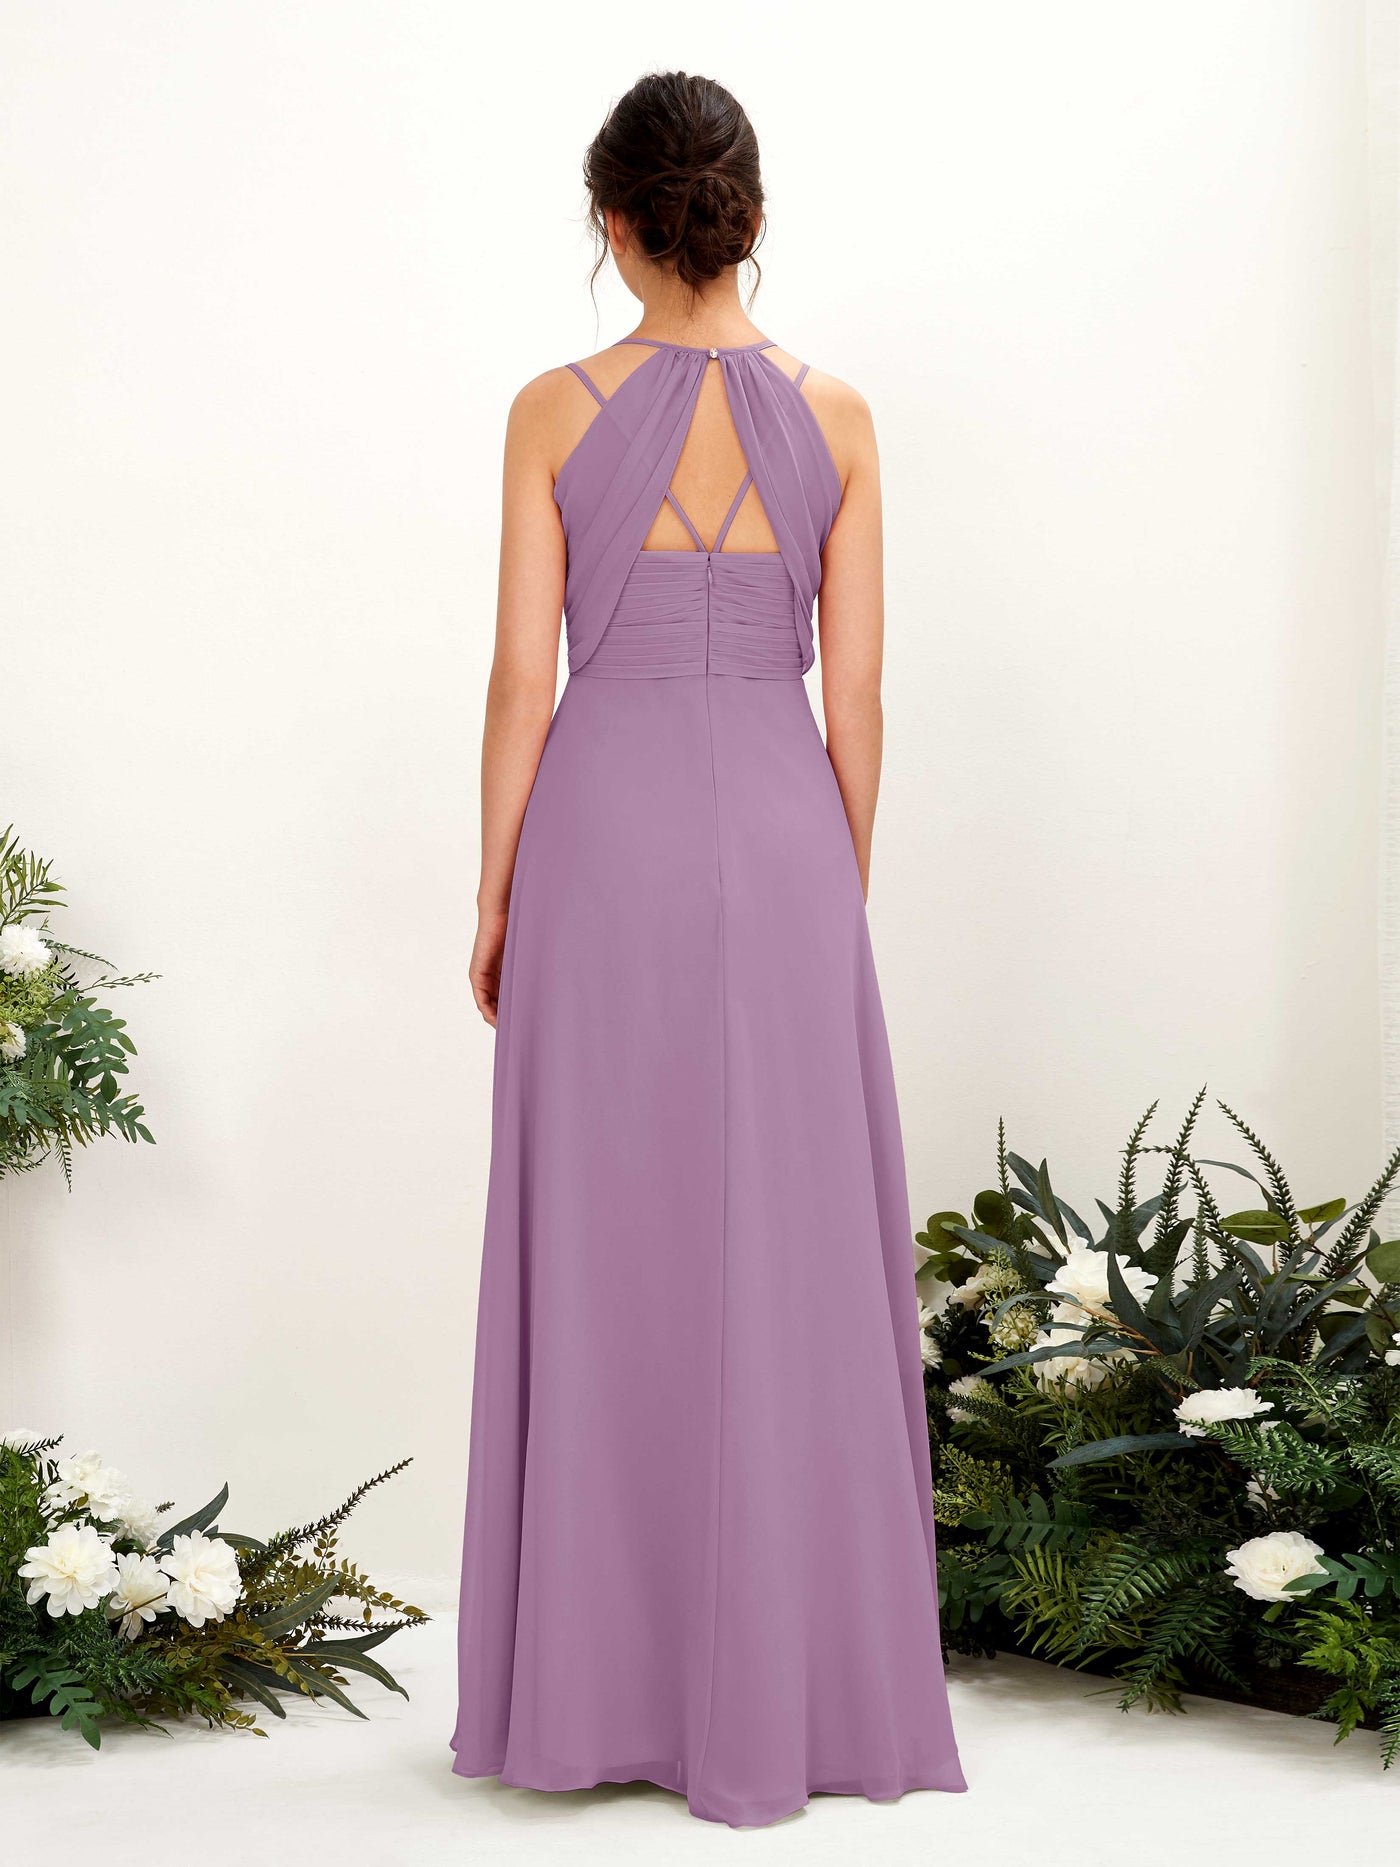 Orchid Mist Bridesmaid Dresses Bridesmaid Dress A-line Chiffon Spaghetti-straps Full Length Sleeveless Wedding Party Dress (81225421)#color_orchid-mist